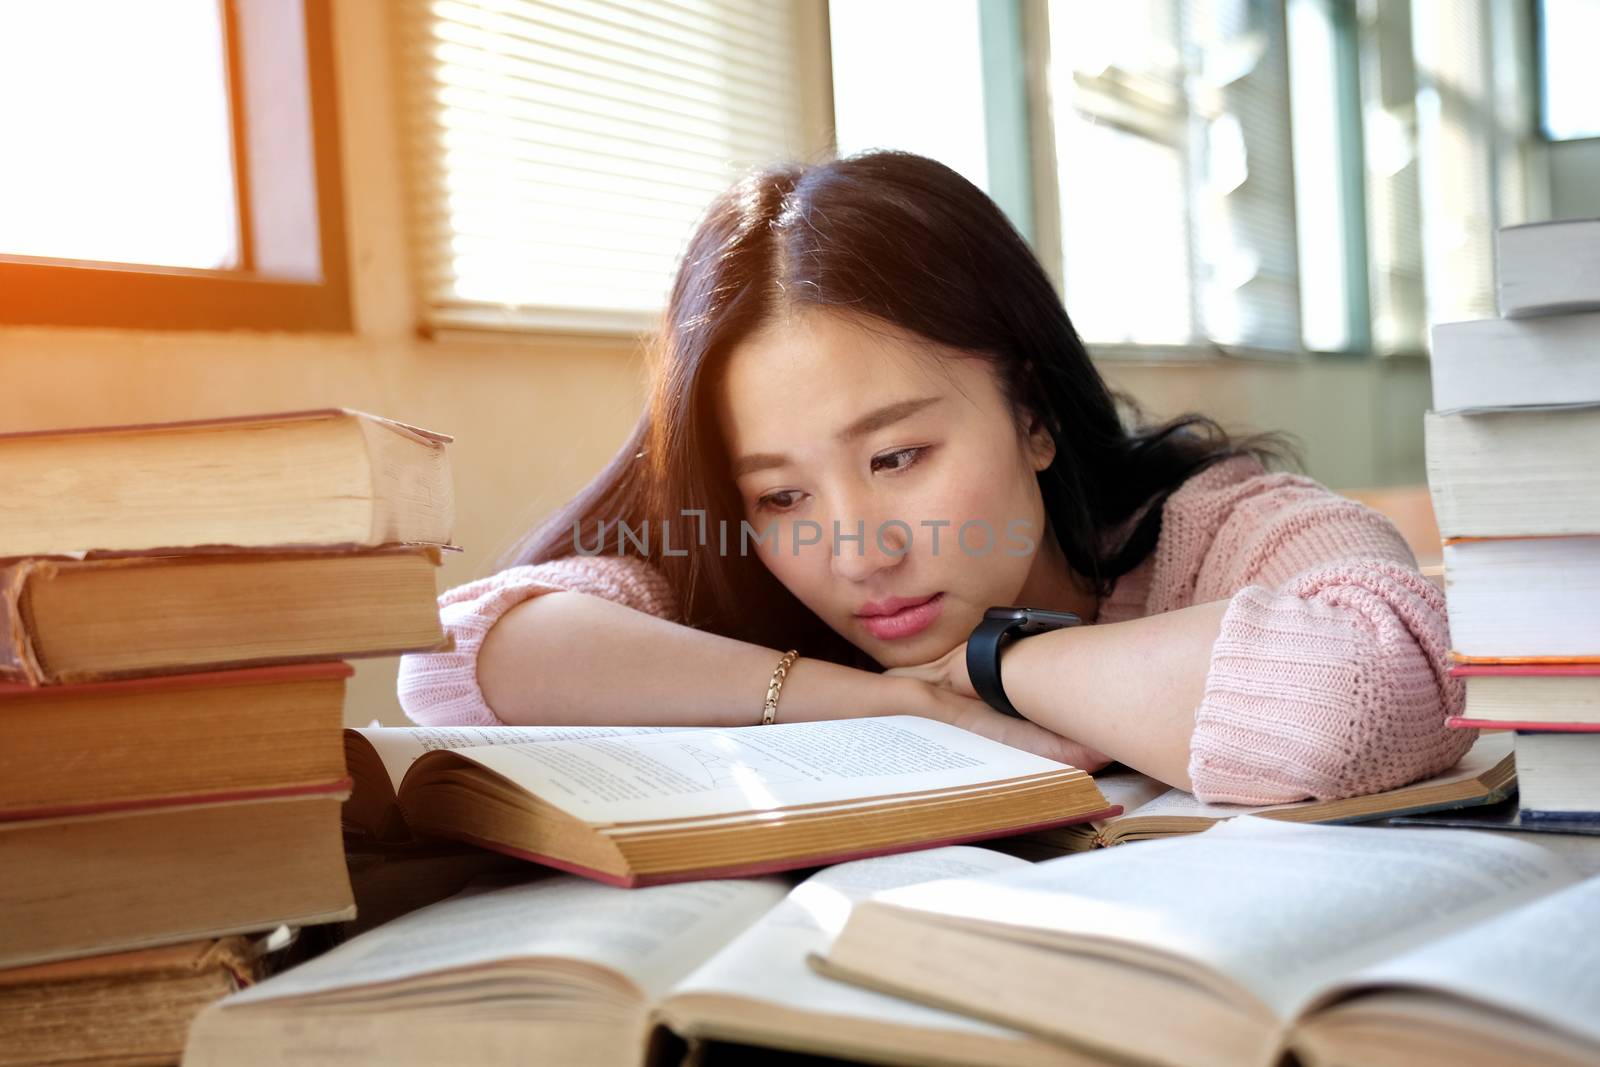 Young woman sleeping in library